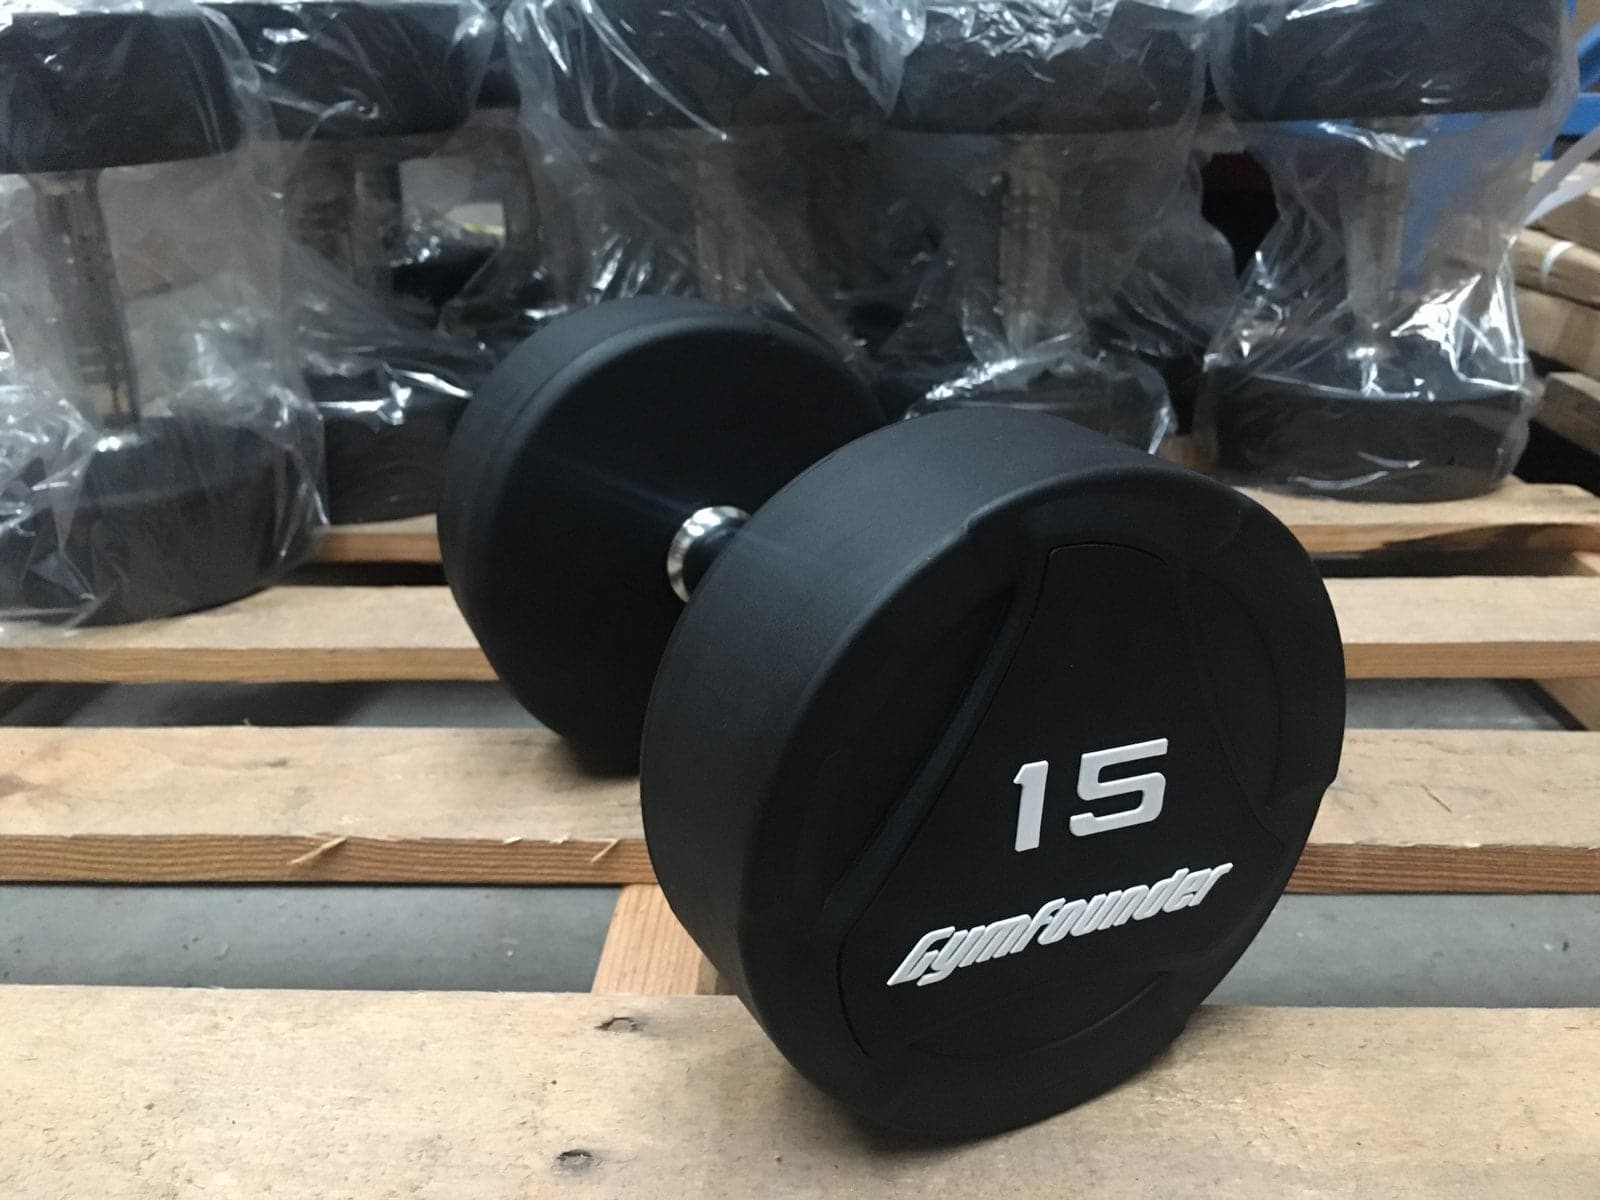 CLEARANCE - Black PU Rubber-Coated  Commercial Dumbbells, Sold in Pairs (Style 1)